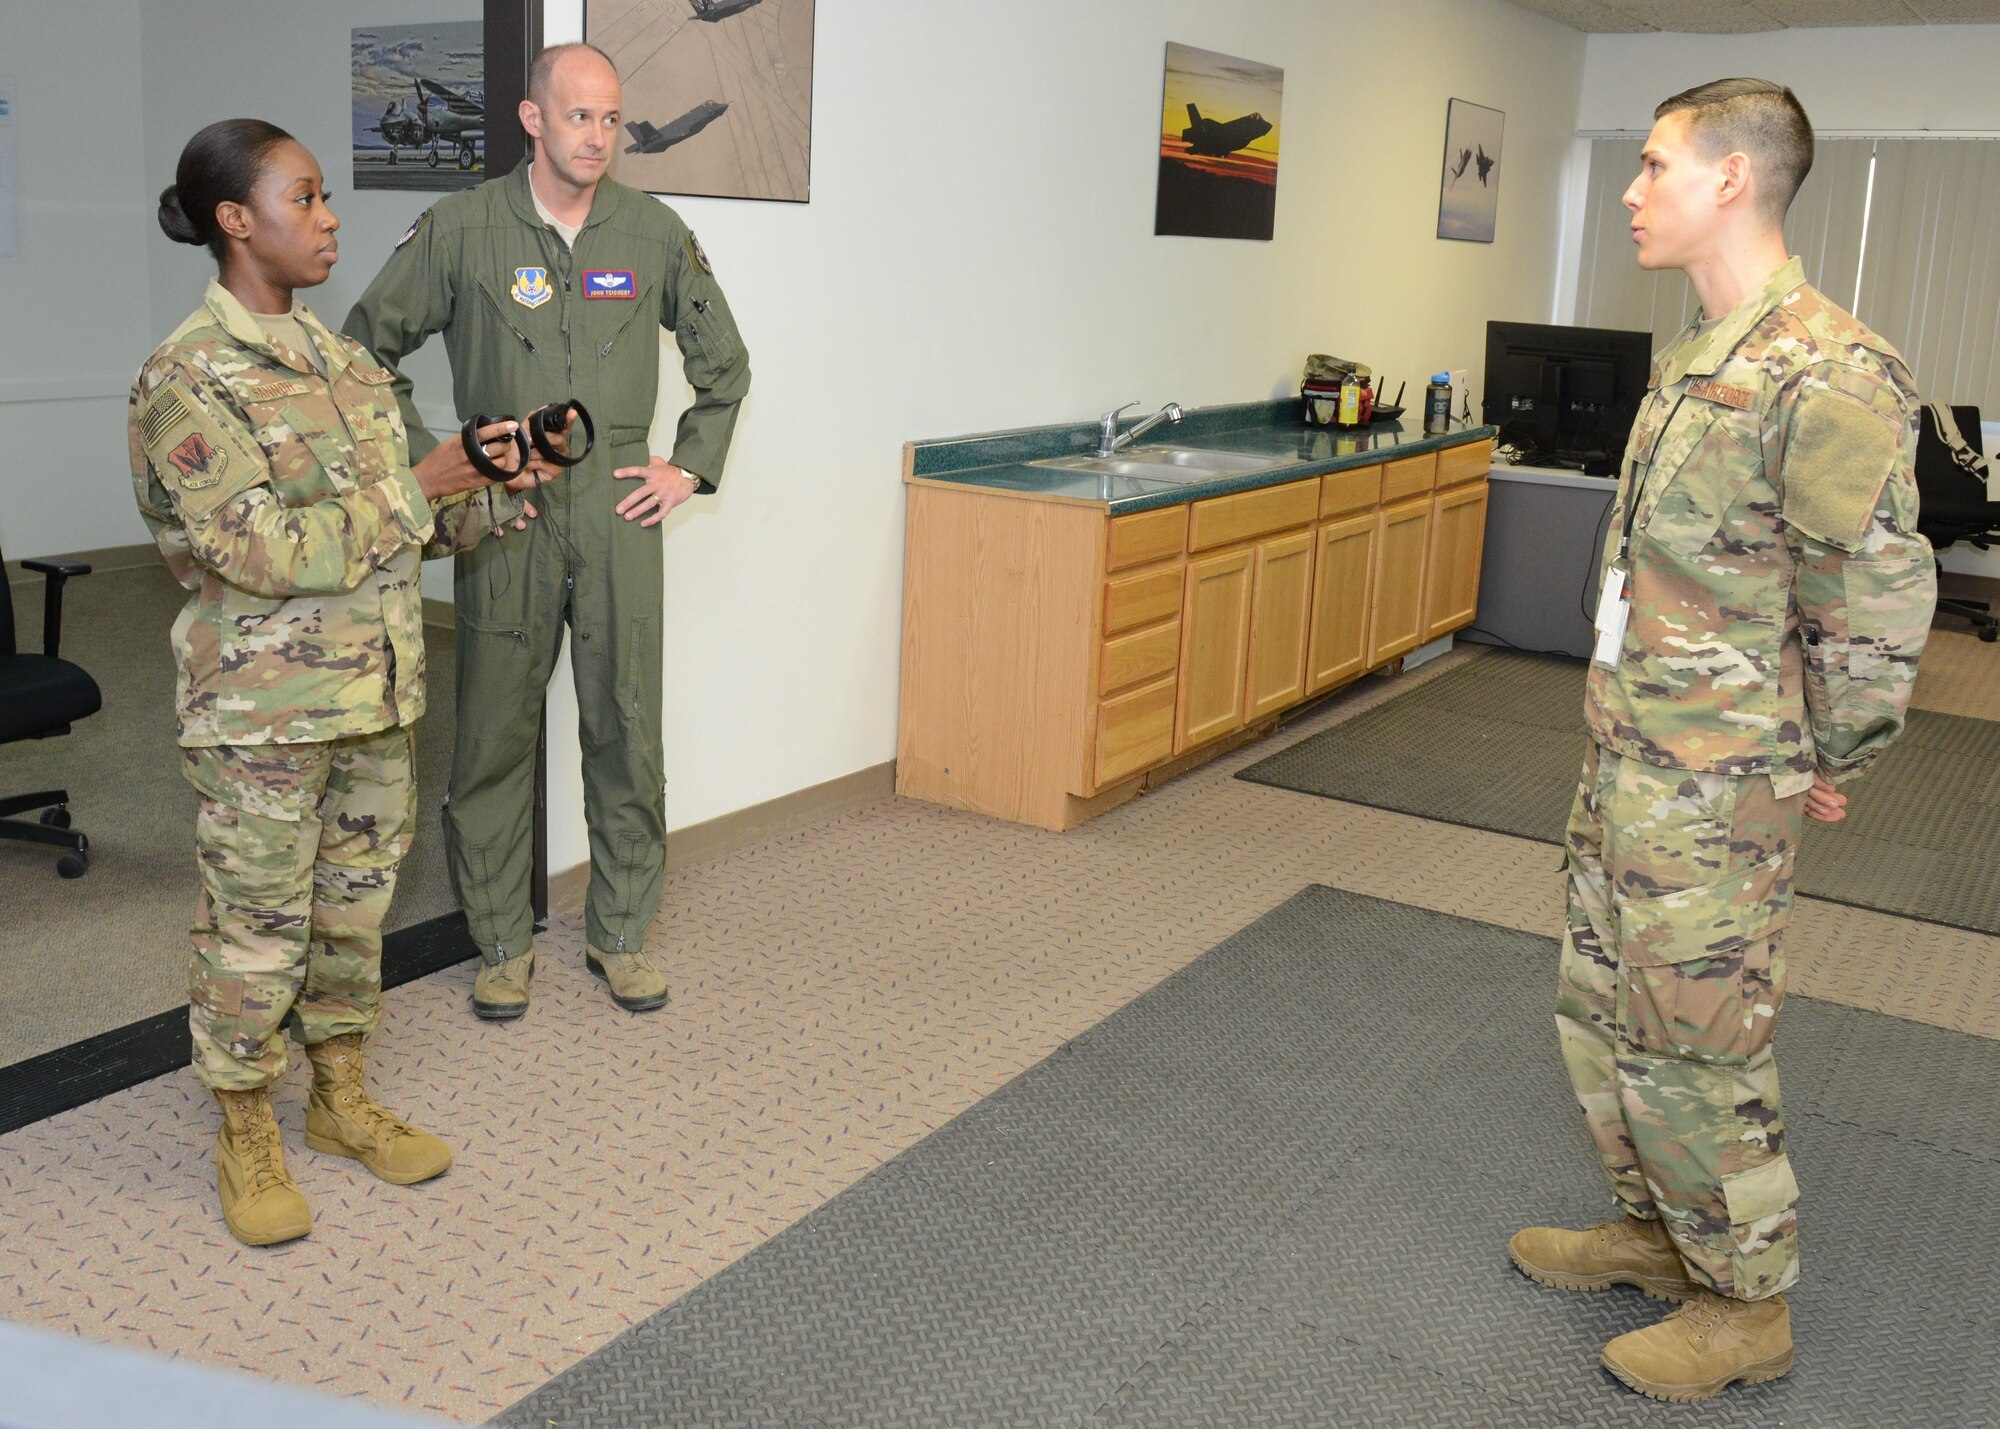 Tech. Sgt. Jeremy Neilson, 412th Aircraft Maintenance Squadron (right), and Staff Sgt. Nori Sannoh, 432nd Maintenance Group, Nellis Air Force Base, Nevada, discuss using virtual reality programs for training with Brig. Gen. E. John Teichert, 412th Test Wing commander, Dec. 20, 2018. (U.S. Air Force photo by Kenji Thuloweit)